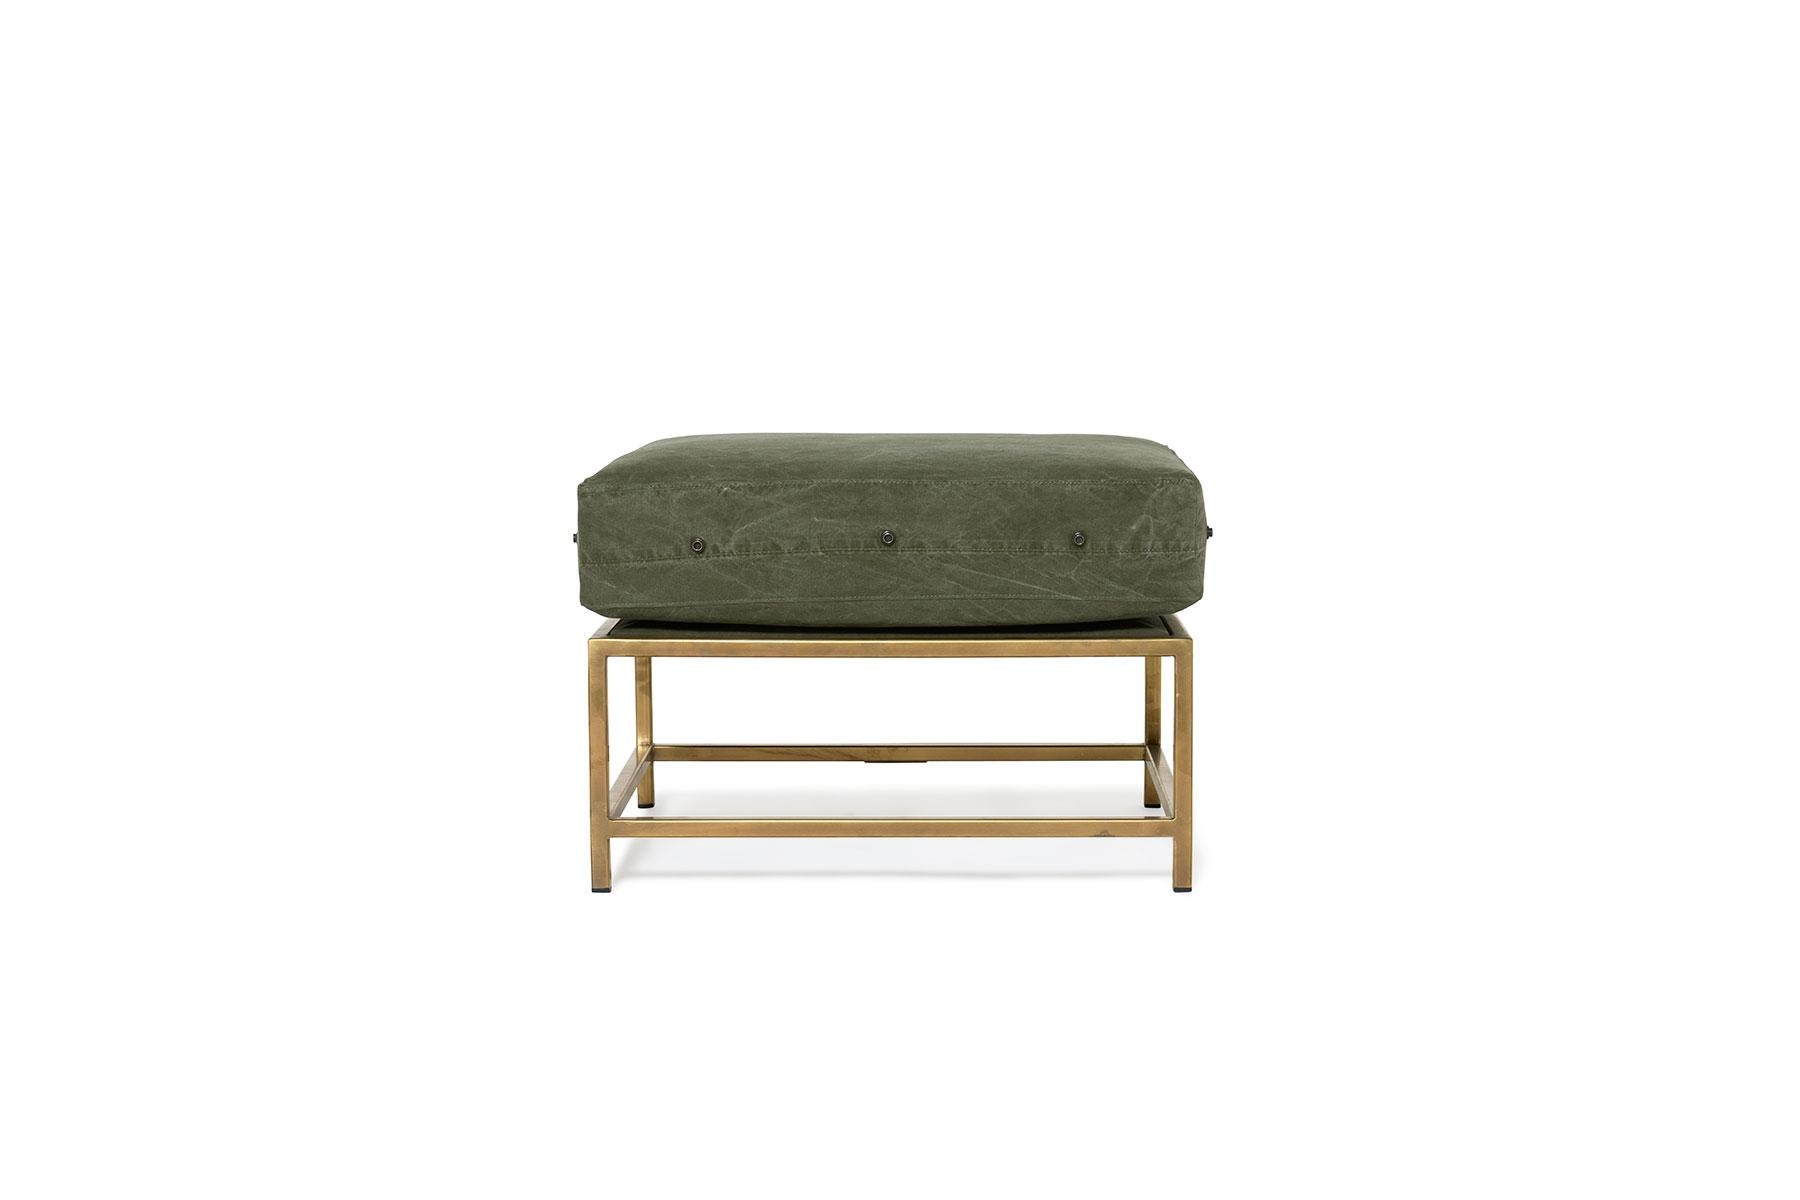 The Inheritance Ottoman by Stephen Kenn is as comfortable as it is unique. The design features an exposed steel frame and a plush upholstered top. This versatile piece can function as seating, a sofa chaise extension, or a footstool and can pair